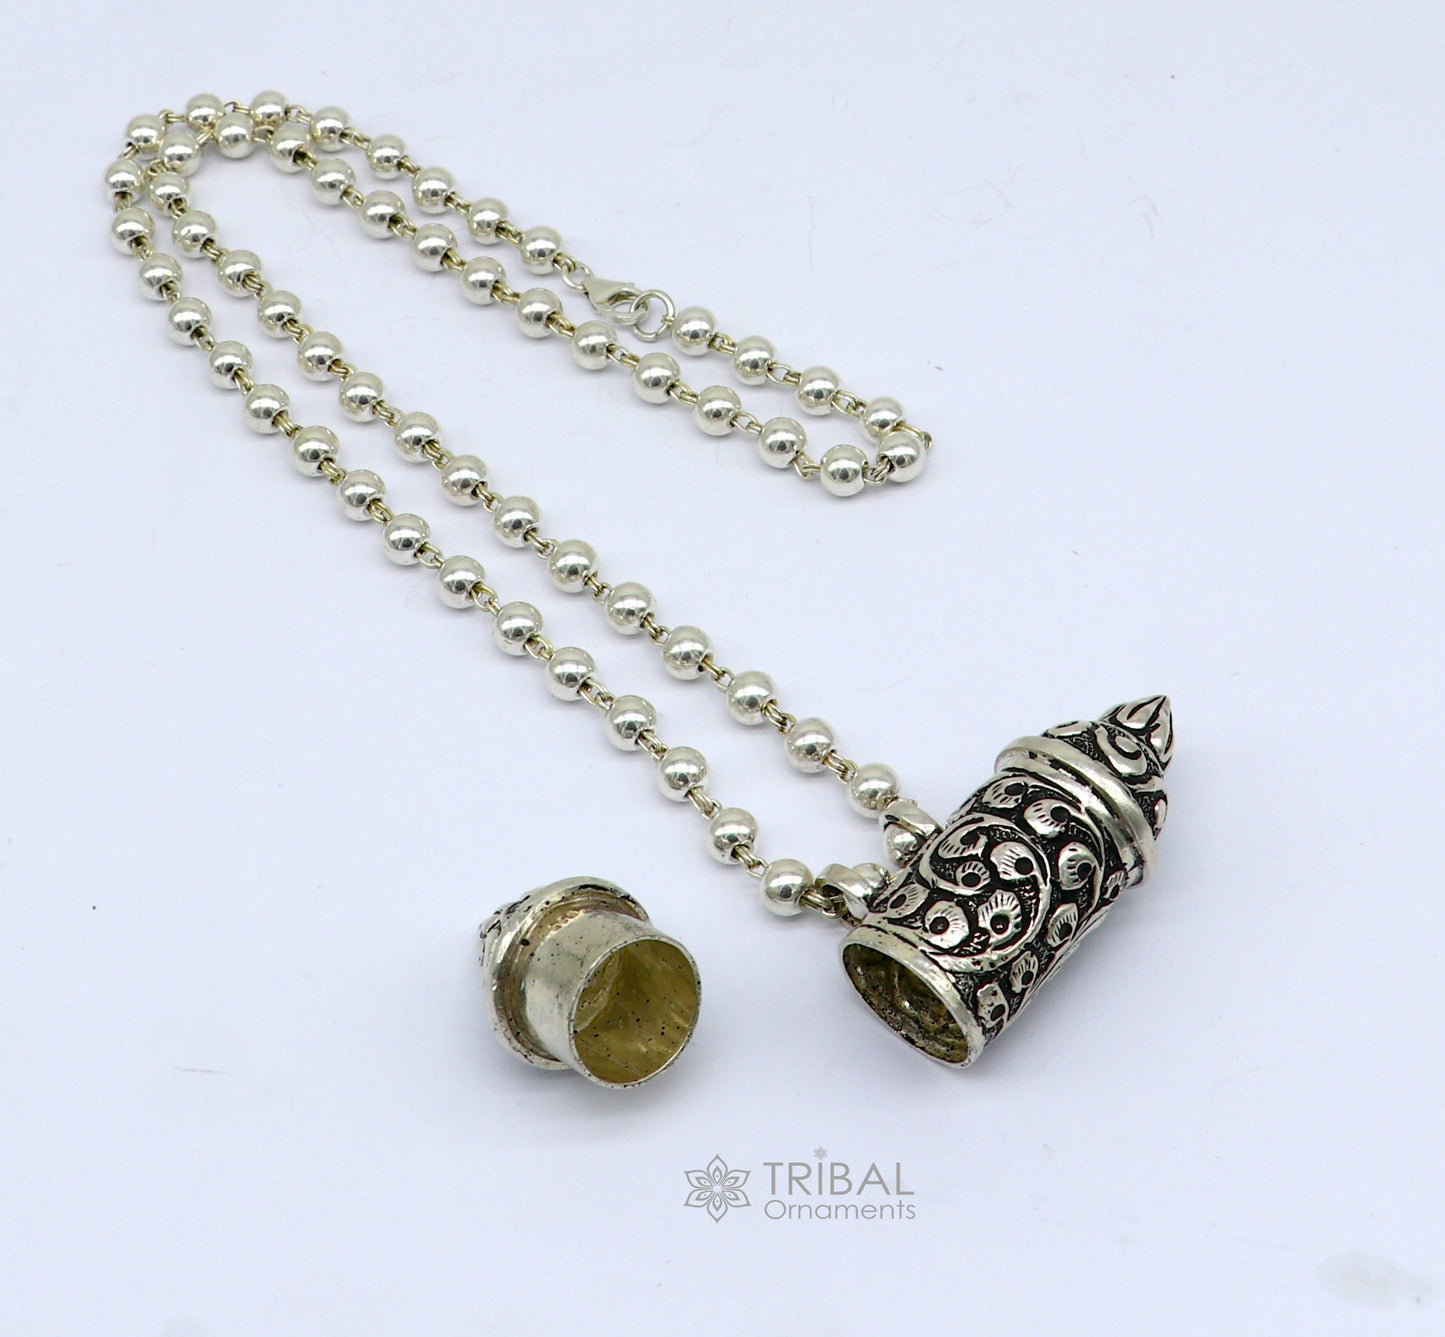 925 Sterling silver handmade Nakshai design pendant amulet mantra box pendant with beaded necklace tribal ethnic cultural jewelry set604 - TRIBAL ORNAMENTS